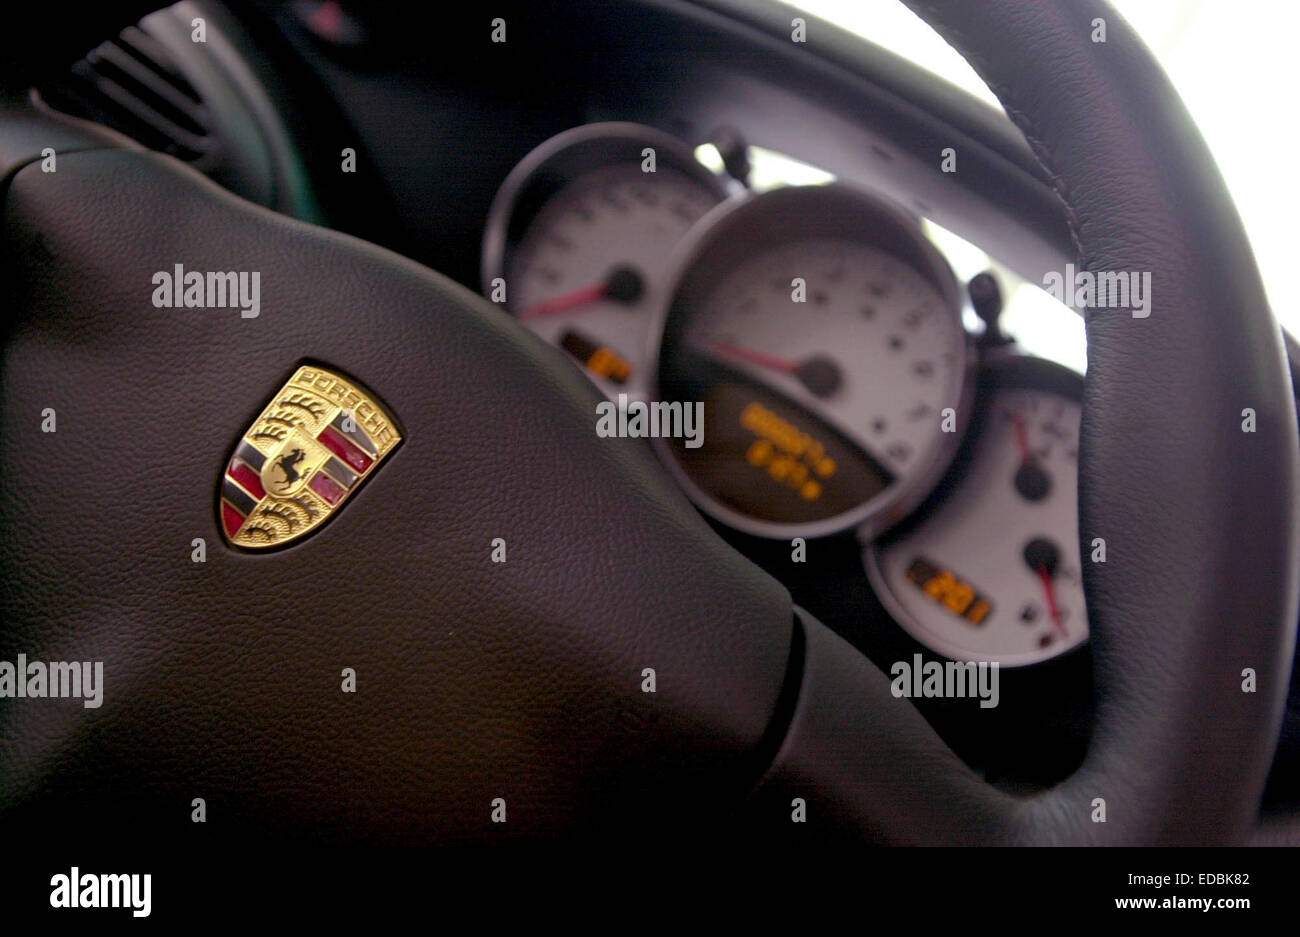 Picture shows the steering wheel and dials of a Porsche vehicle. Stock Photo